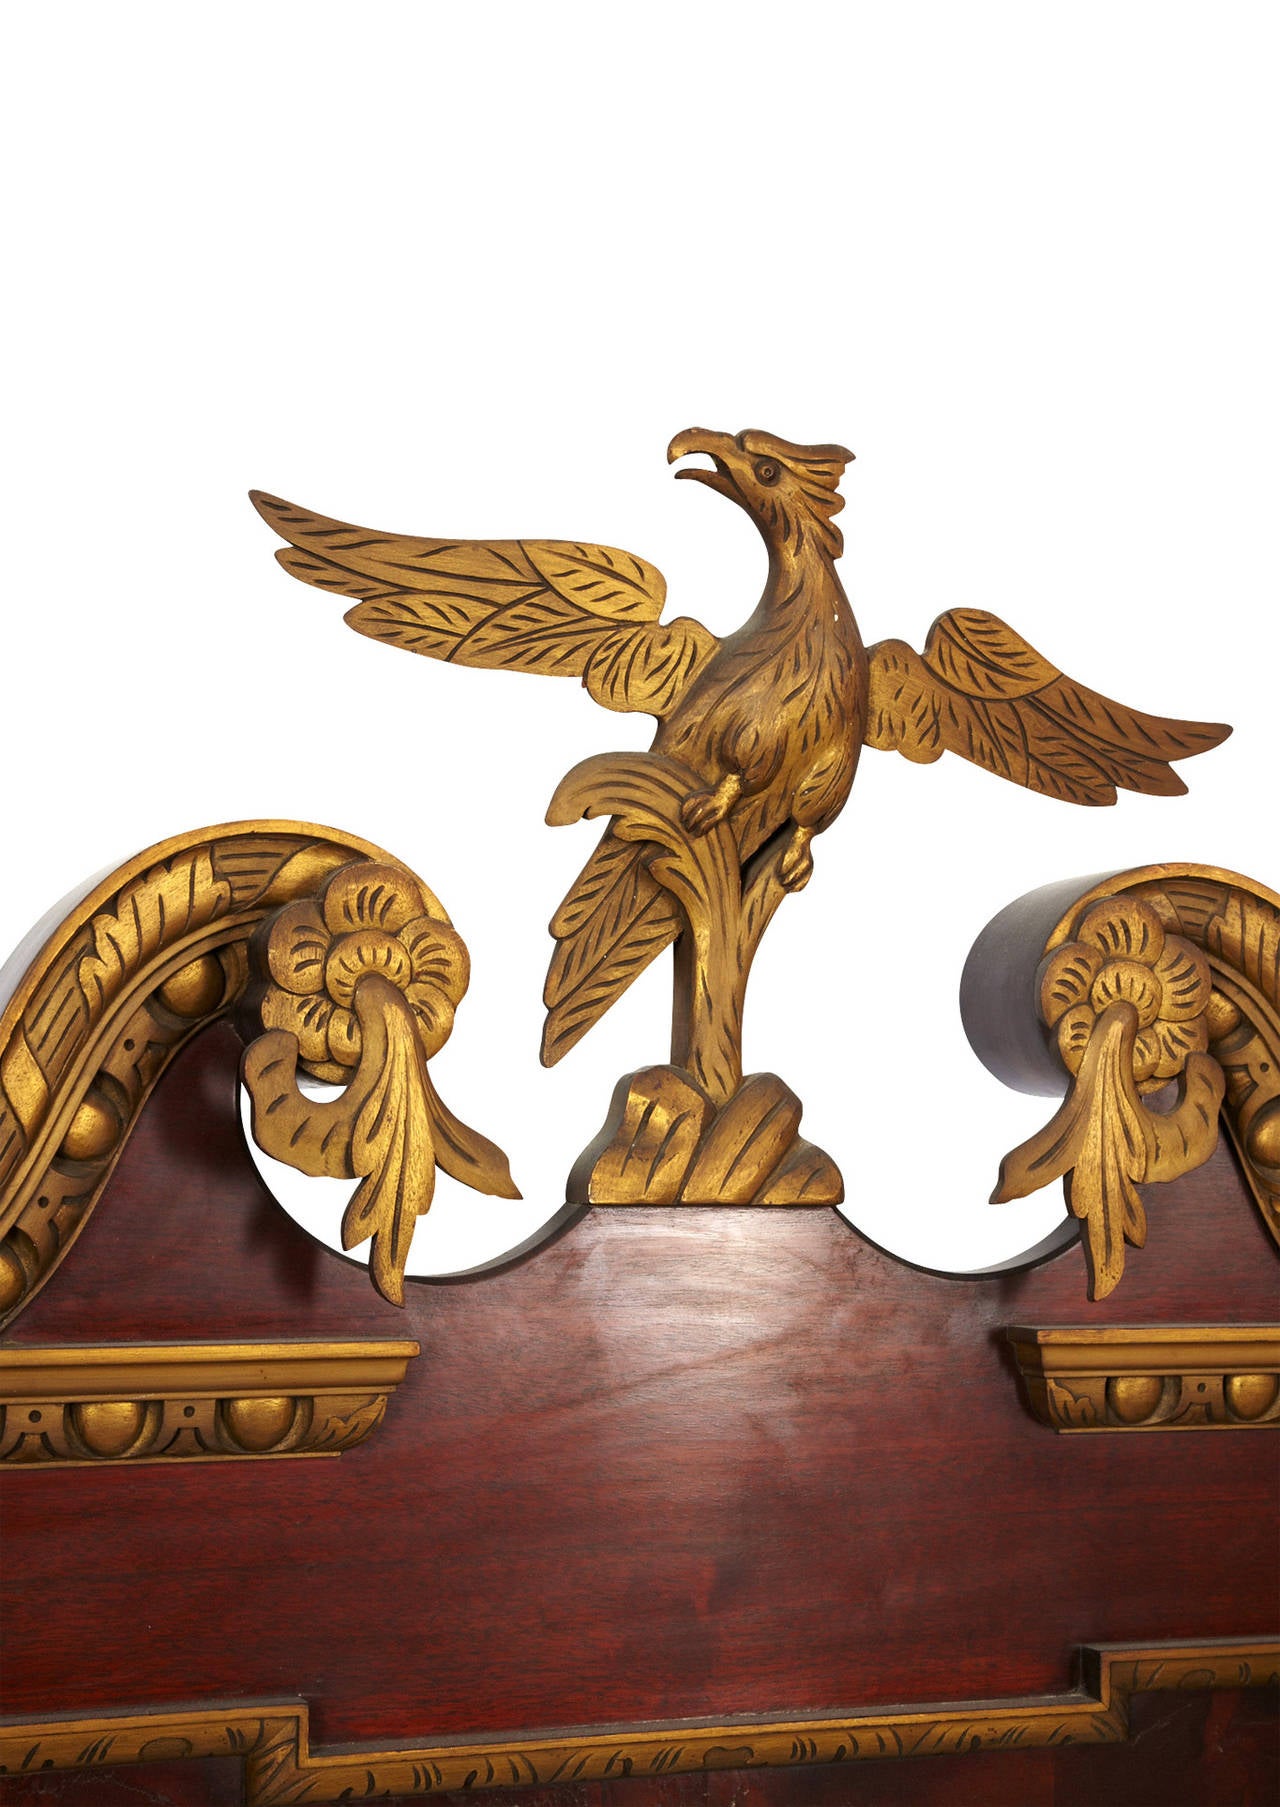 The chippendale style of this mirror is a balance of simplicity and ornamentation. The mirror itself is rectangular and set into russet colored and gold tinted frame. A phoenix-eagle adorns the pediment, flanked by elaborate carved arches.